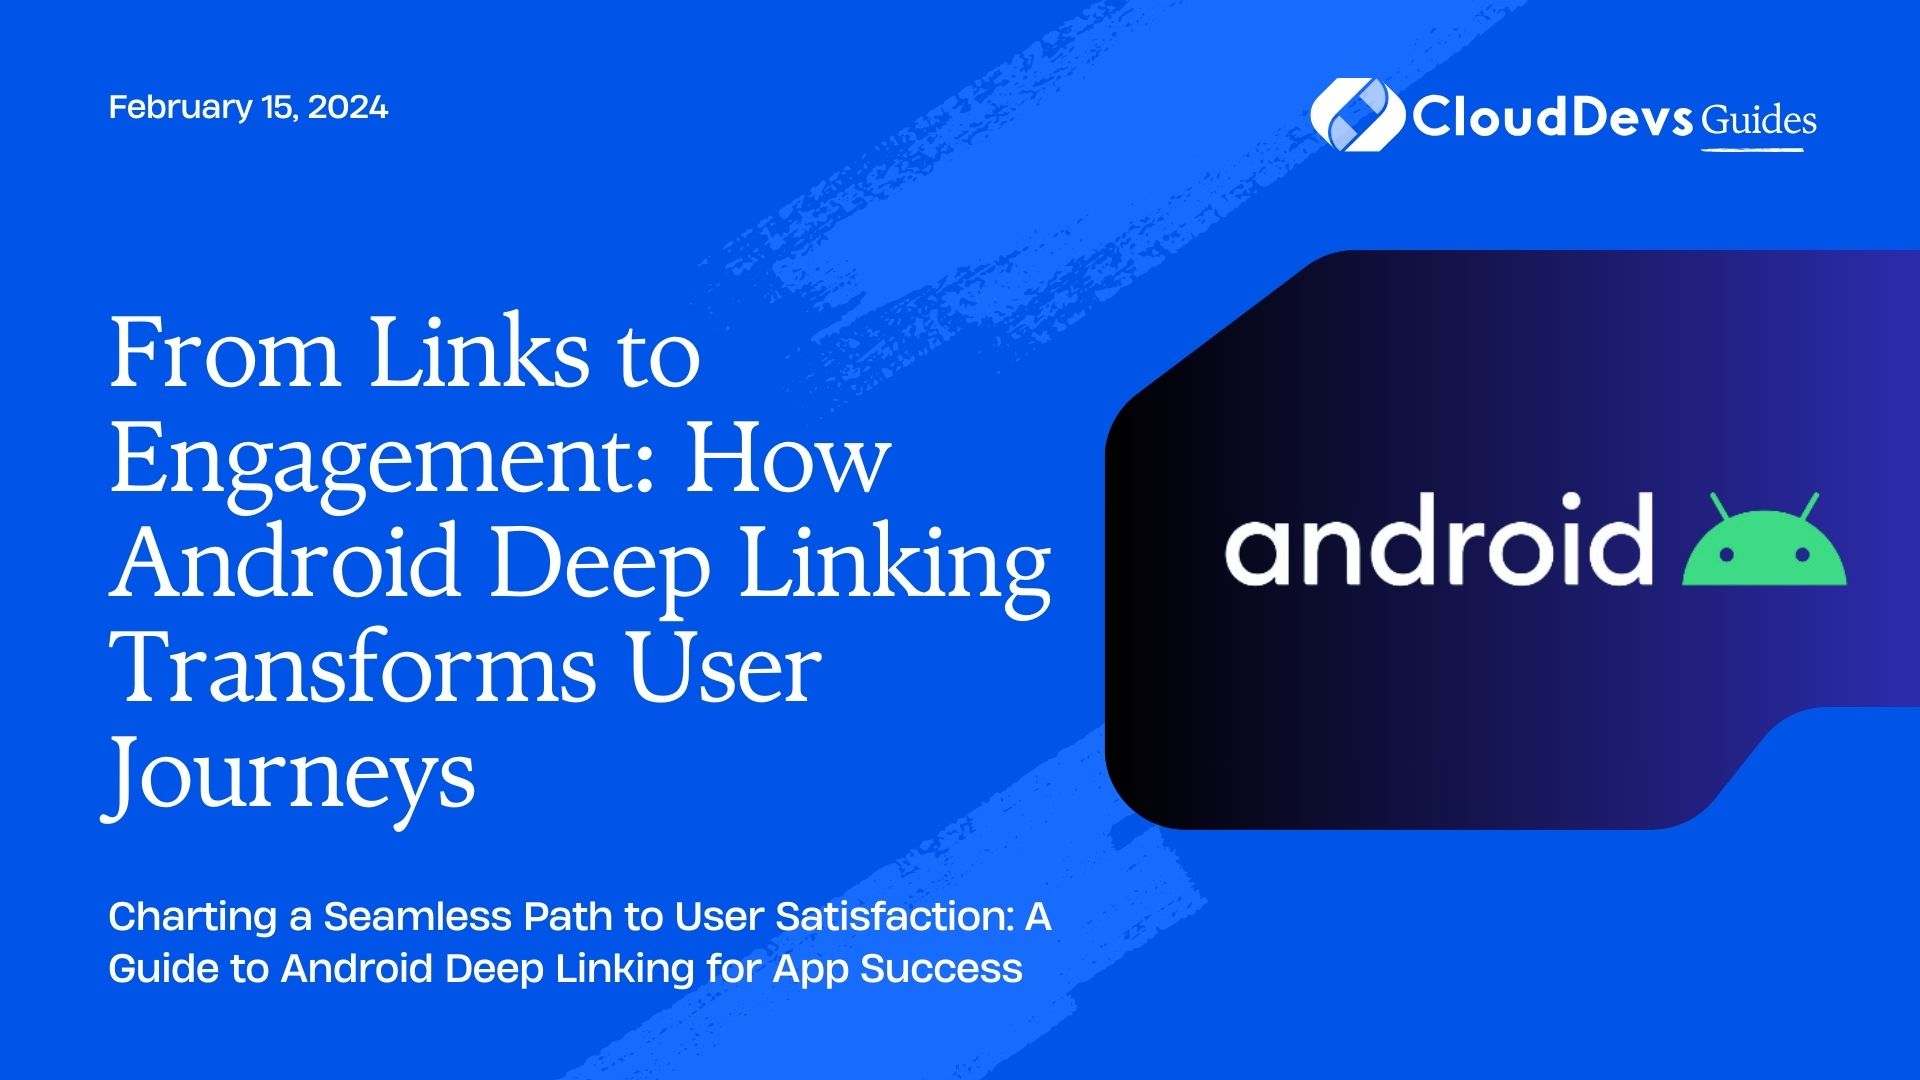 Android Deep Linking: Navigating Users to Specific App Screens